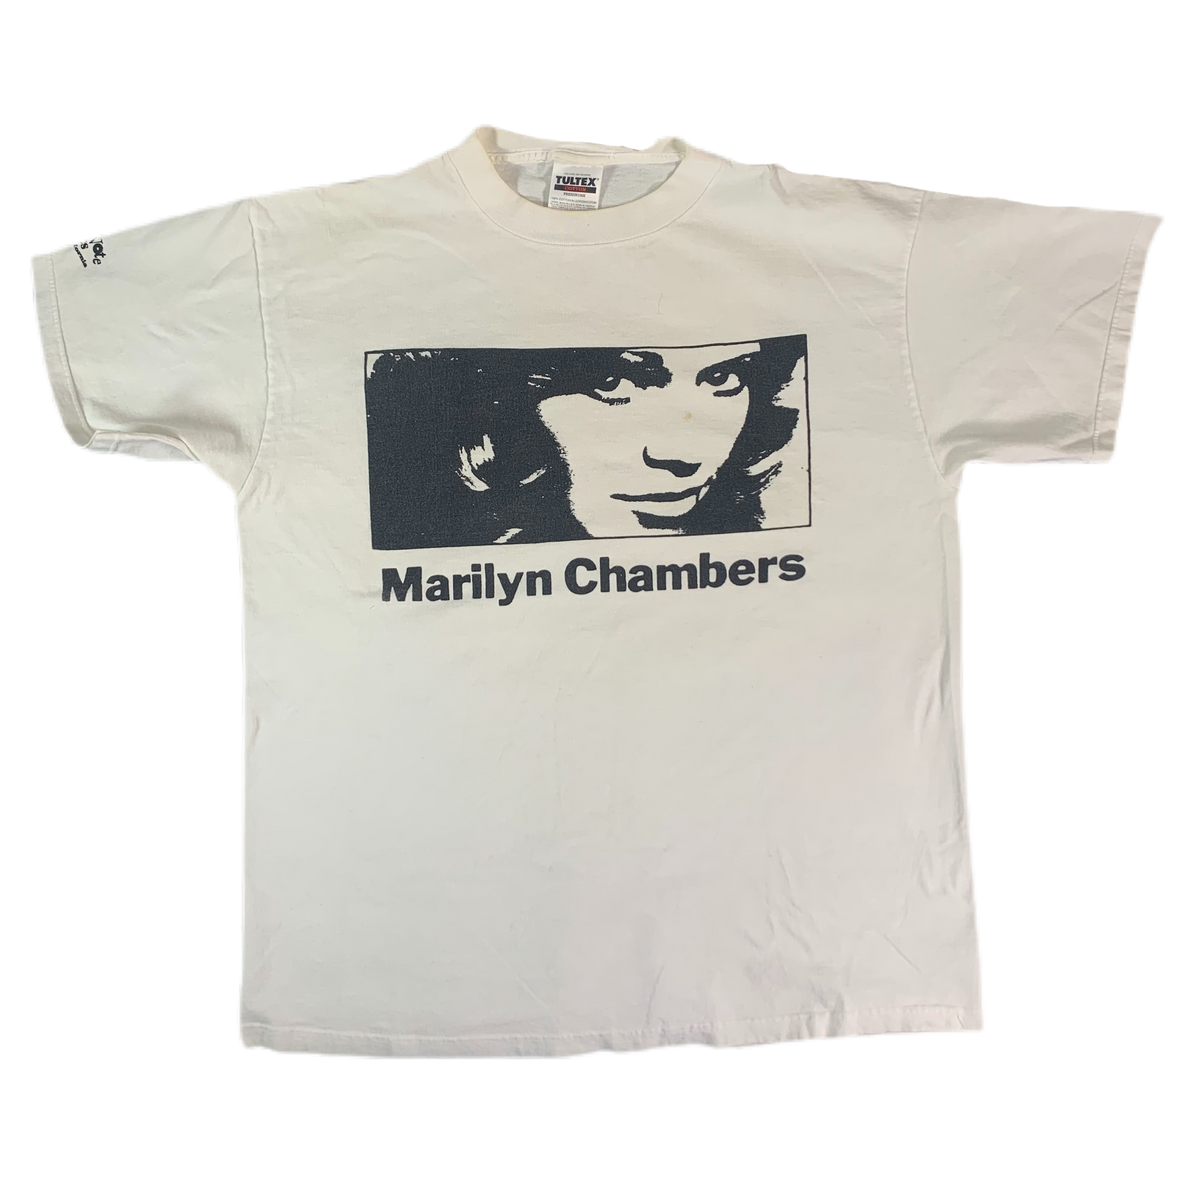 Vintage Marilyn Chambers “Ransom Note Graphics” T-Shirt